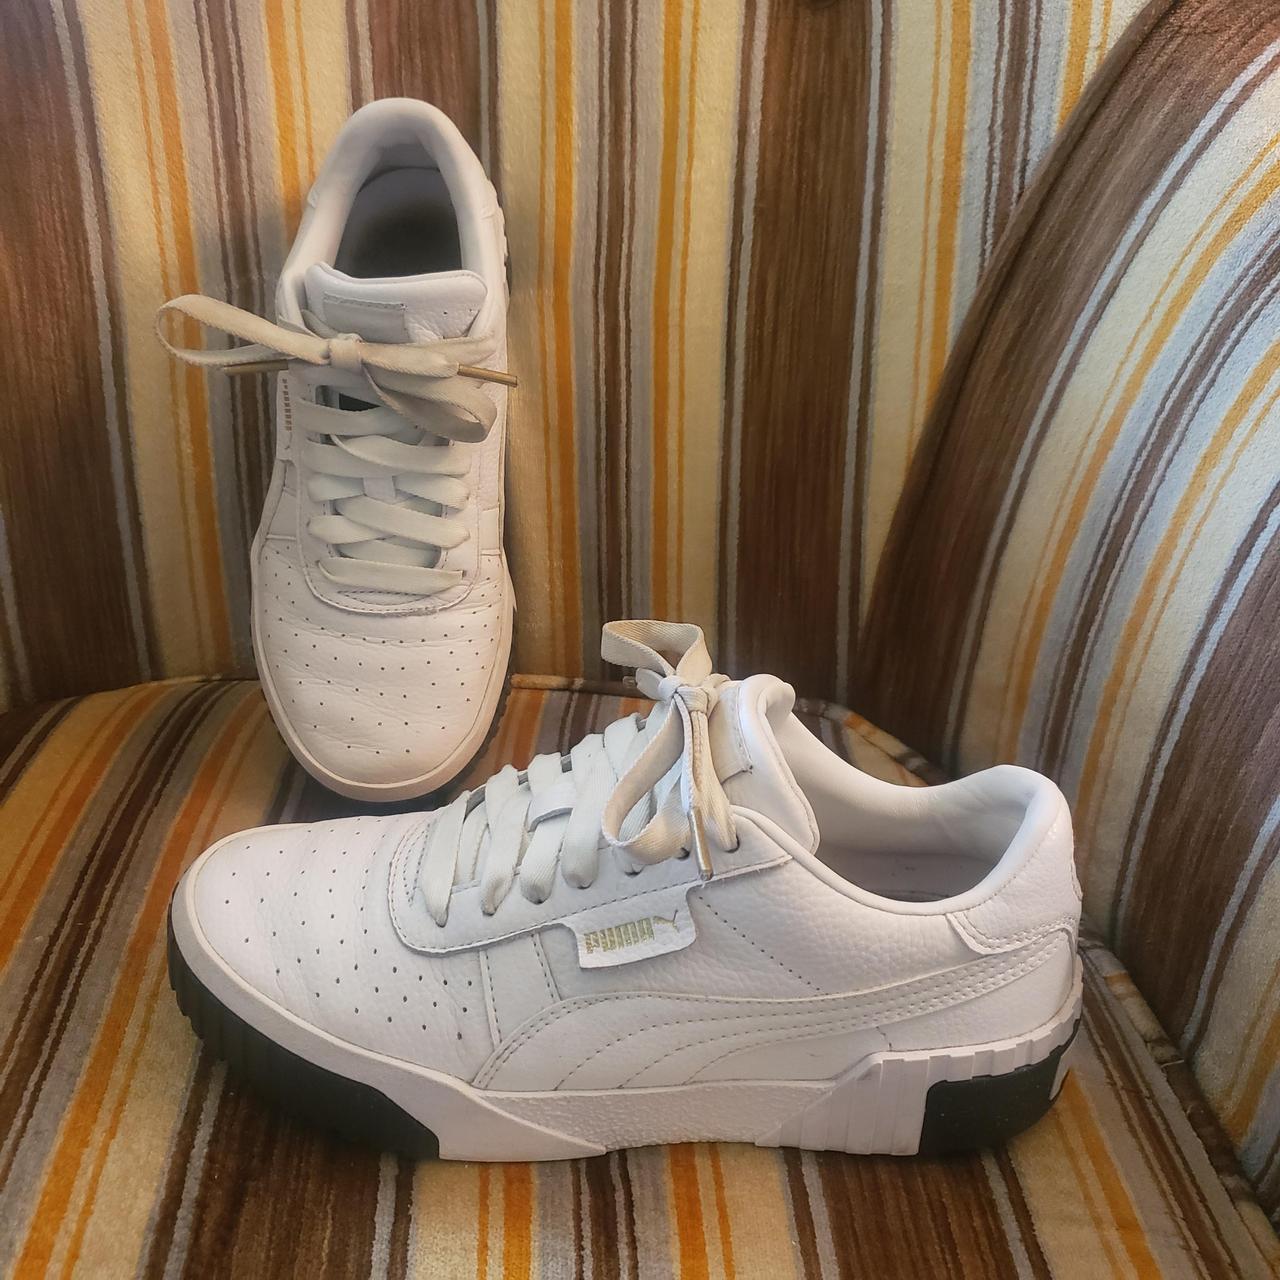 Women's White and Navy Puma Sneakers In great... - Depop